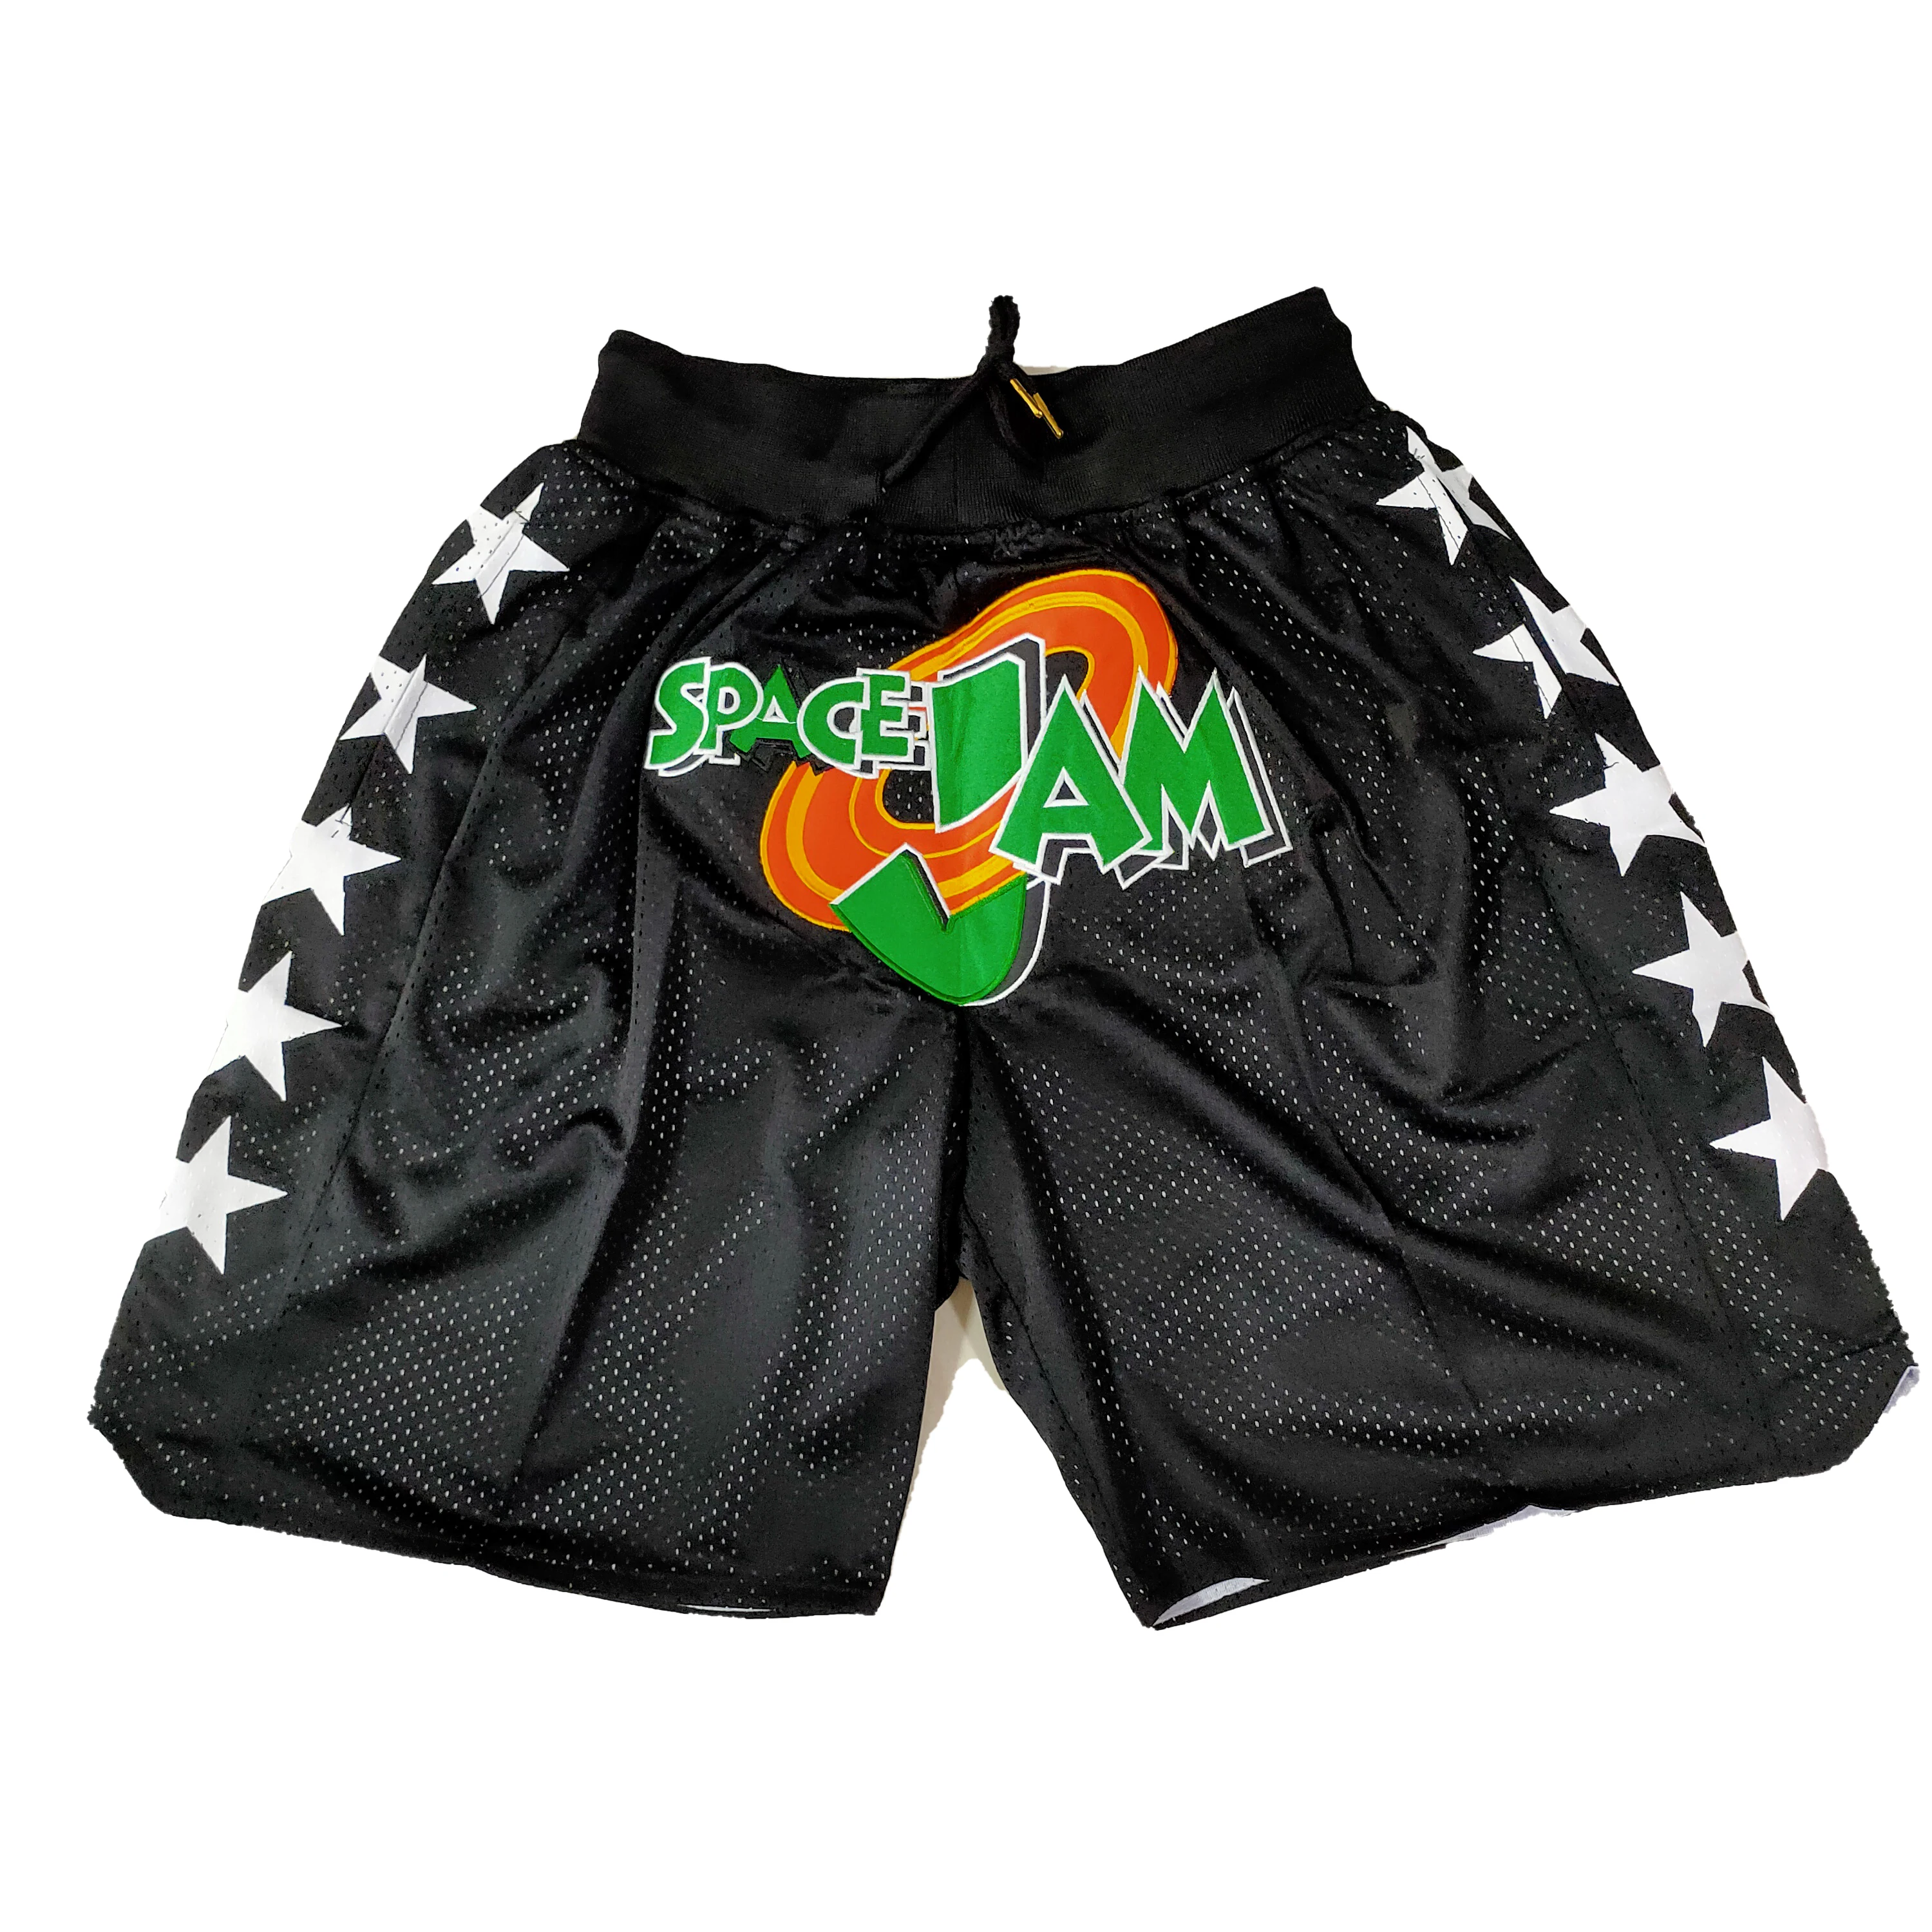 

Stitched Mesh Basketball Shorts Fashion Embroidered Just Don Basketball Shorts For Men Outdoor Sports Wear clothing